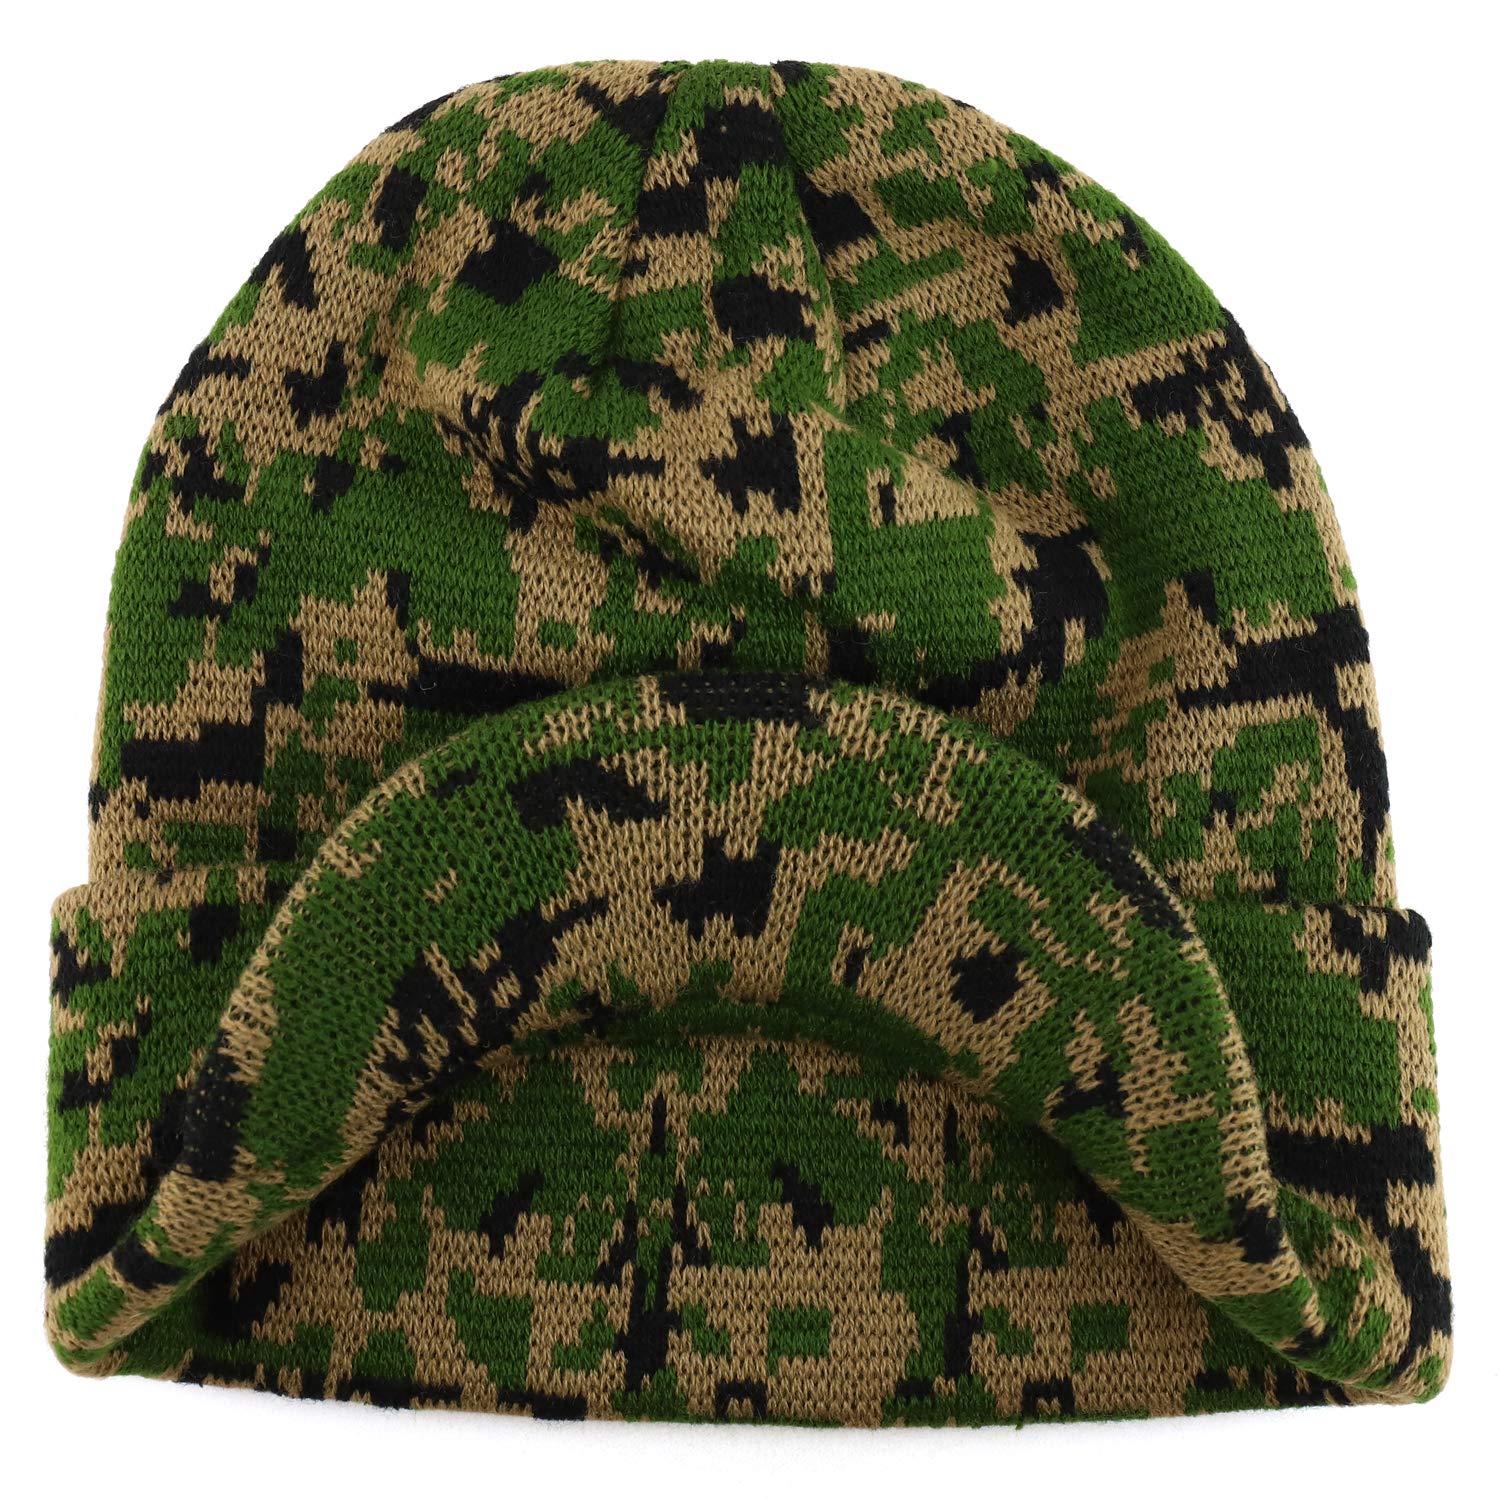 Armycrew Camouflage Knit Beanie Hat with Visor - WDG